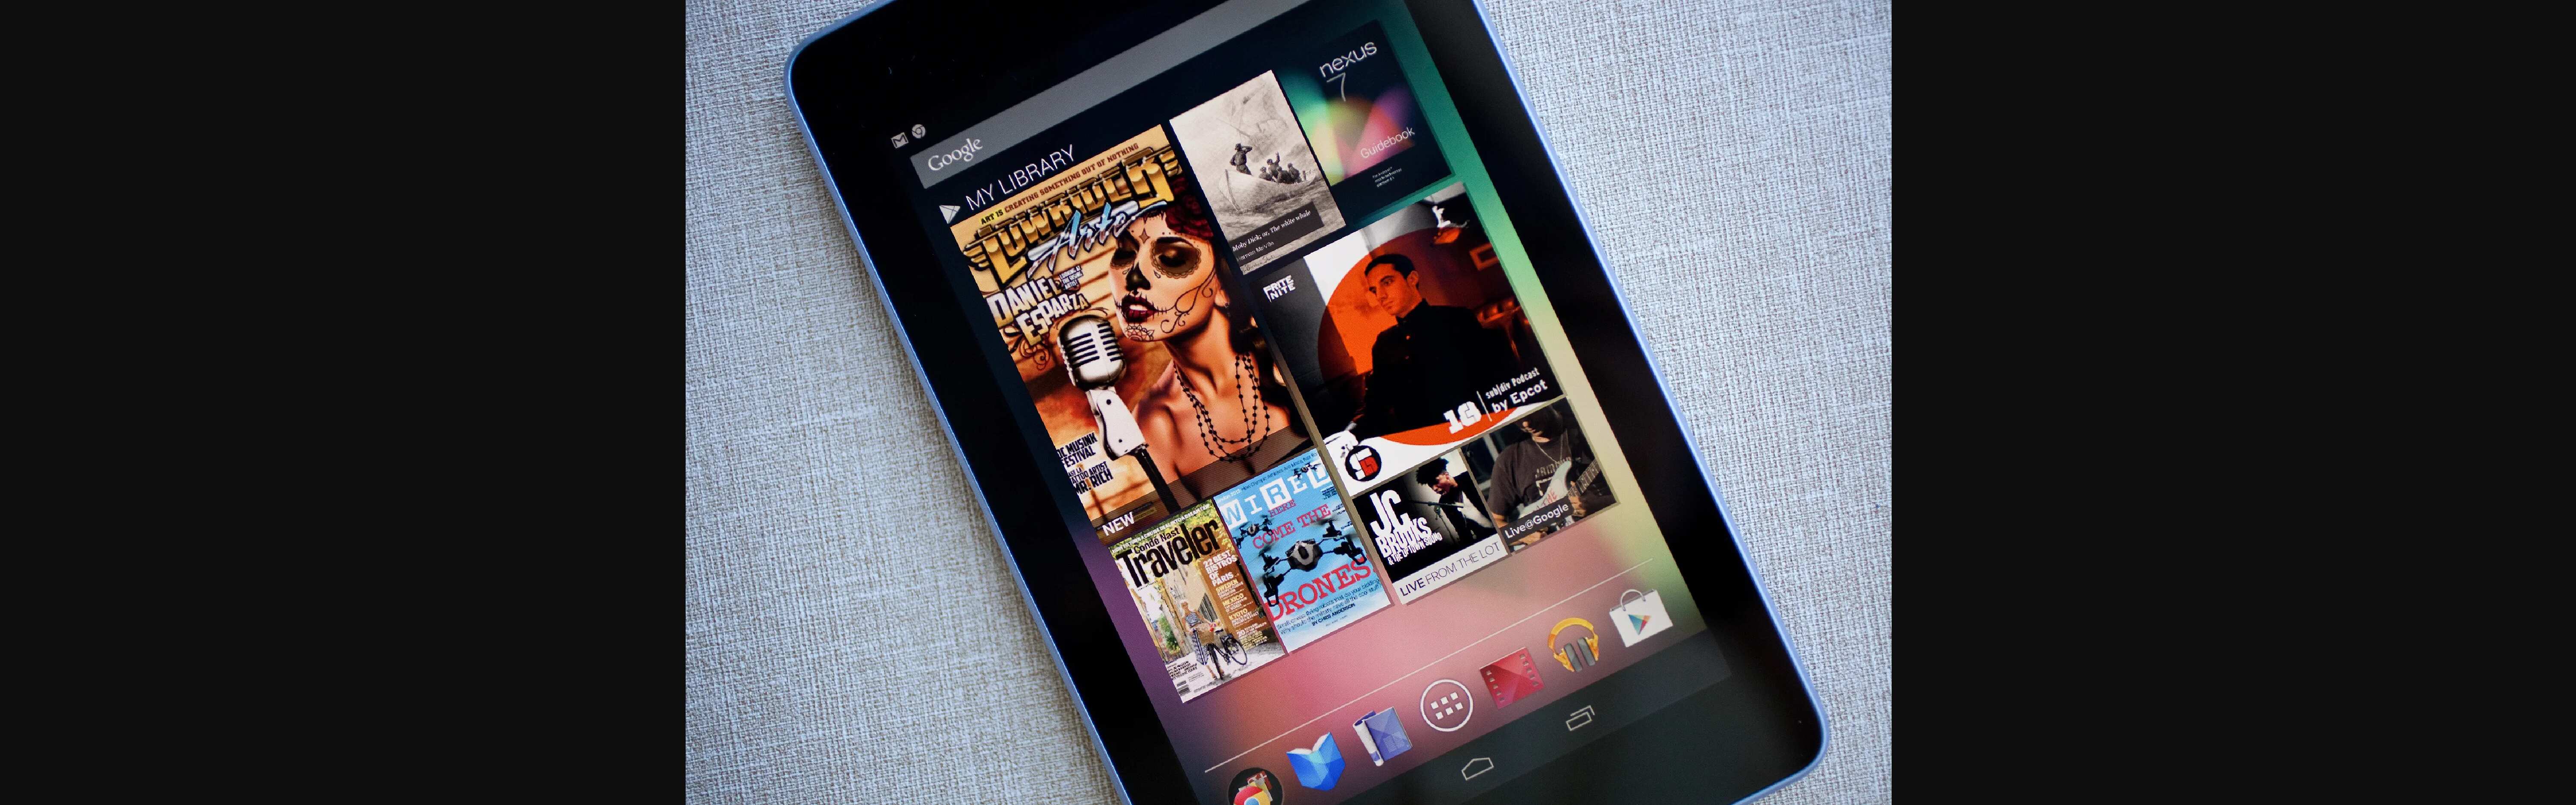 when-does-the-new-nexus-7-tablet-come-out